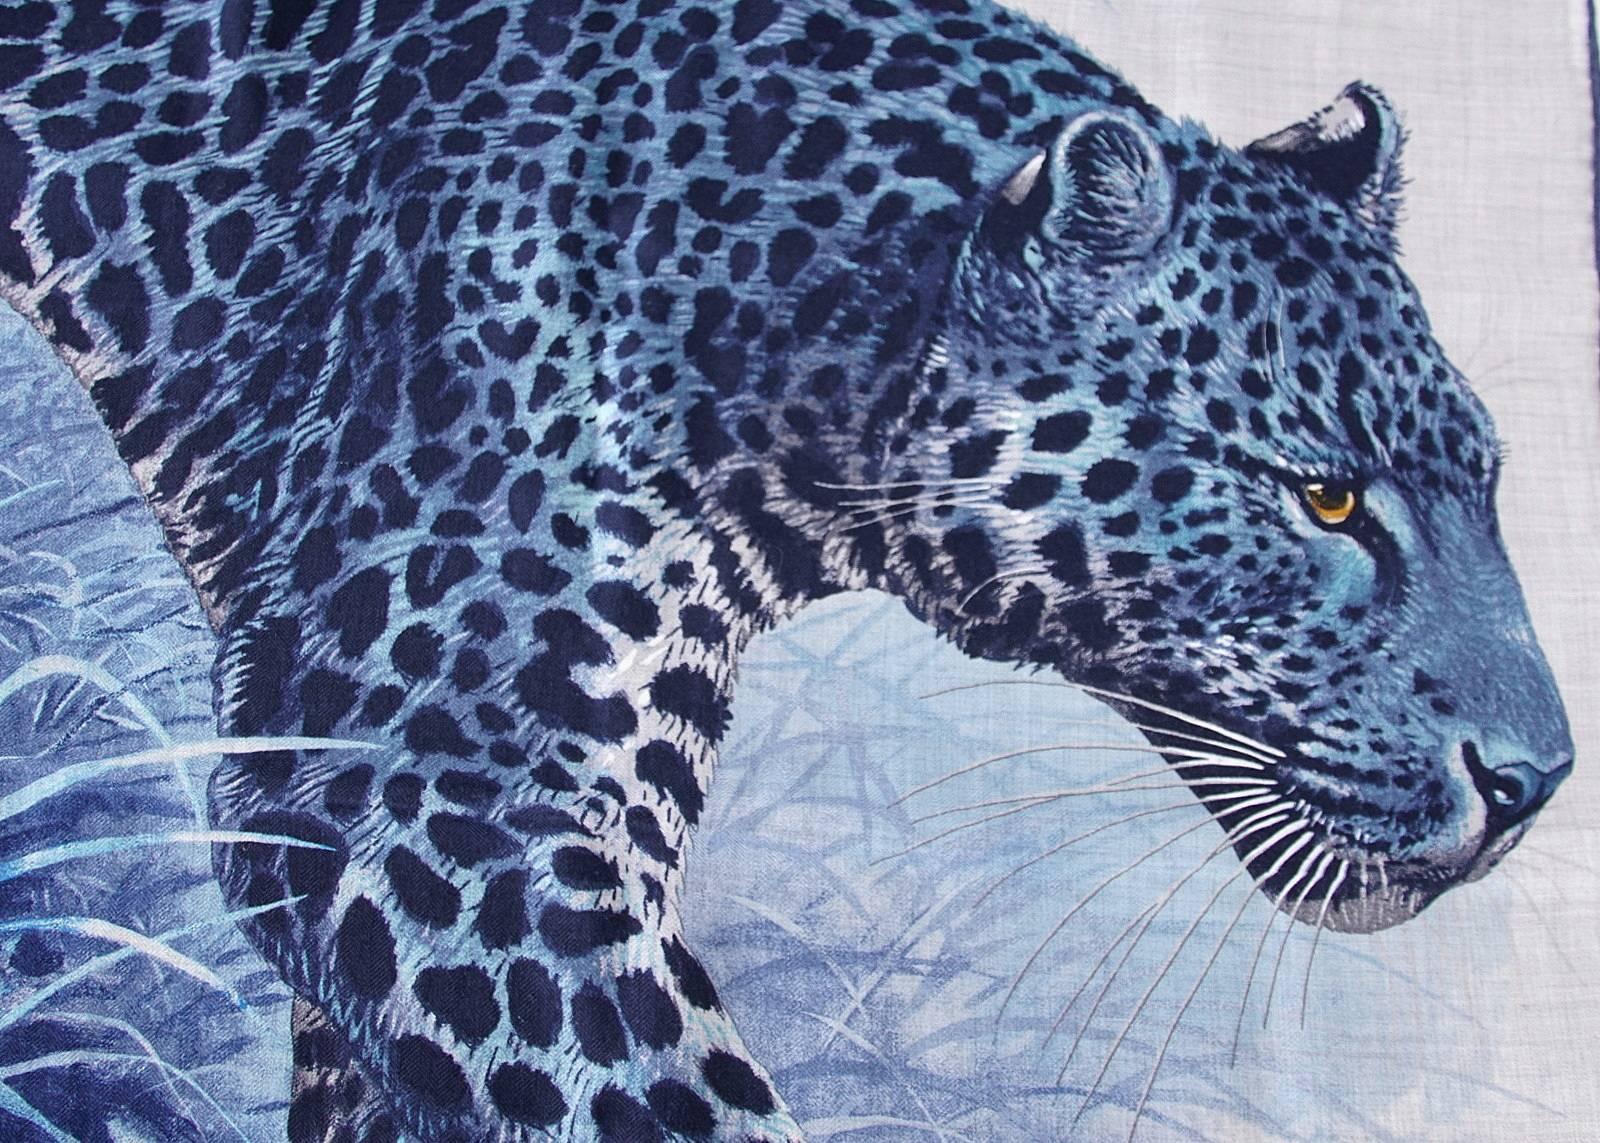 Guaranteed authentic HERMES Limited Edition PANTHERA PARDUS Cashmere/Silk large scarf/shawl.
Stunningly  beautiful coveted reissued Robert Dallet shawl with signature hand rolled edge.
In shades of blue with grays, this shawl depicts a panther in